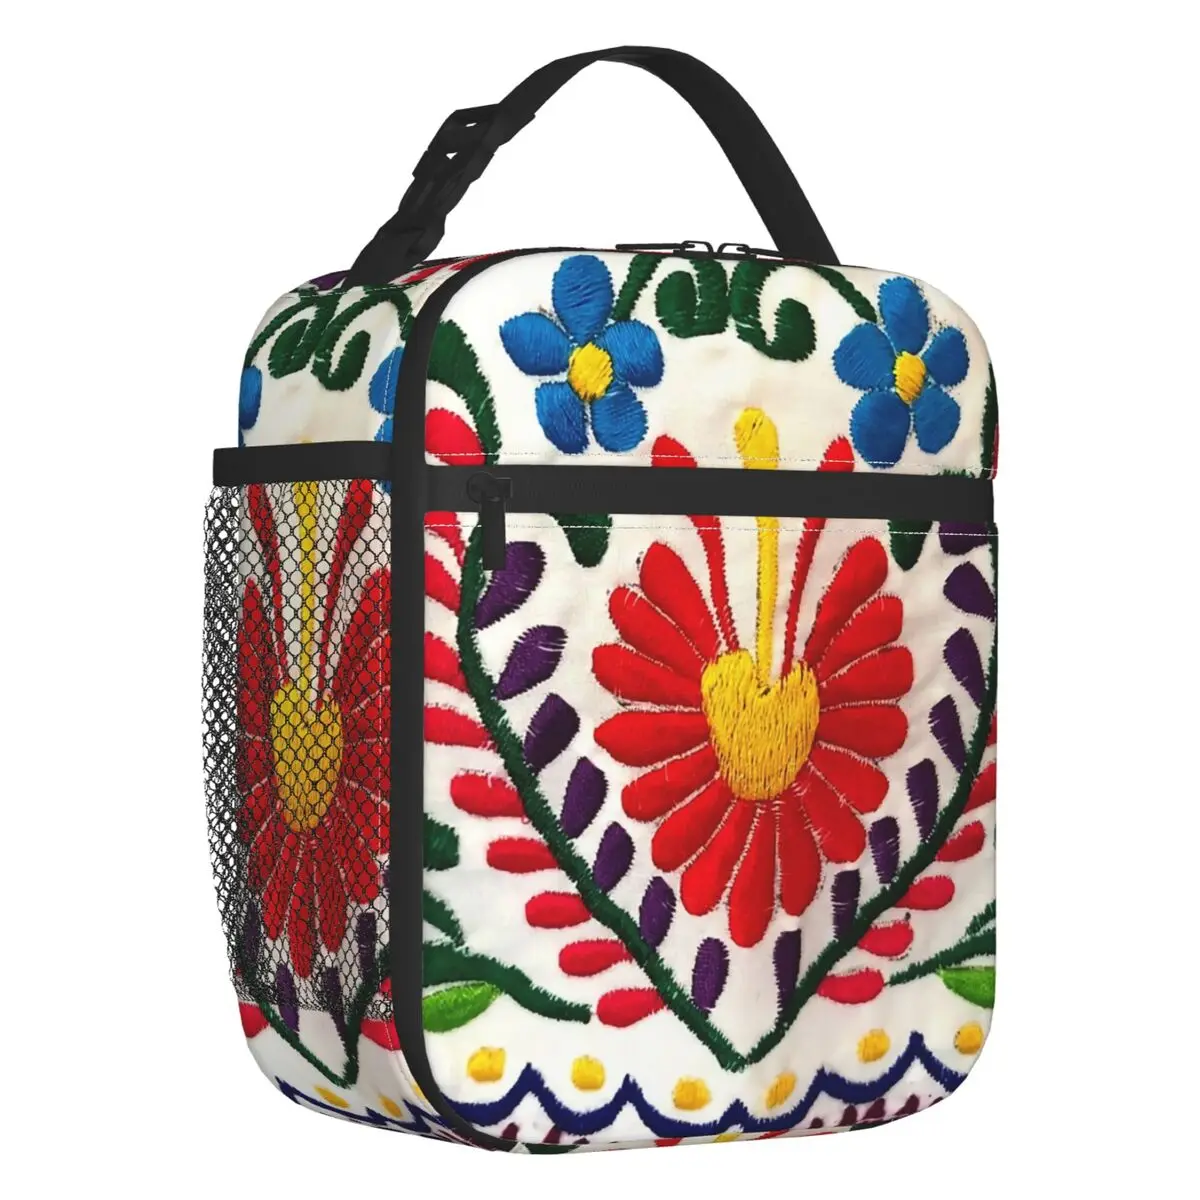 Mexican Flowers 3D Print Embroidery Pattern Portable Lunch Boxes Waterproof Thermal Cooler Food Insulated Lunch Bag Office Work